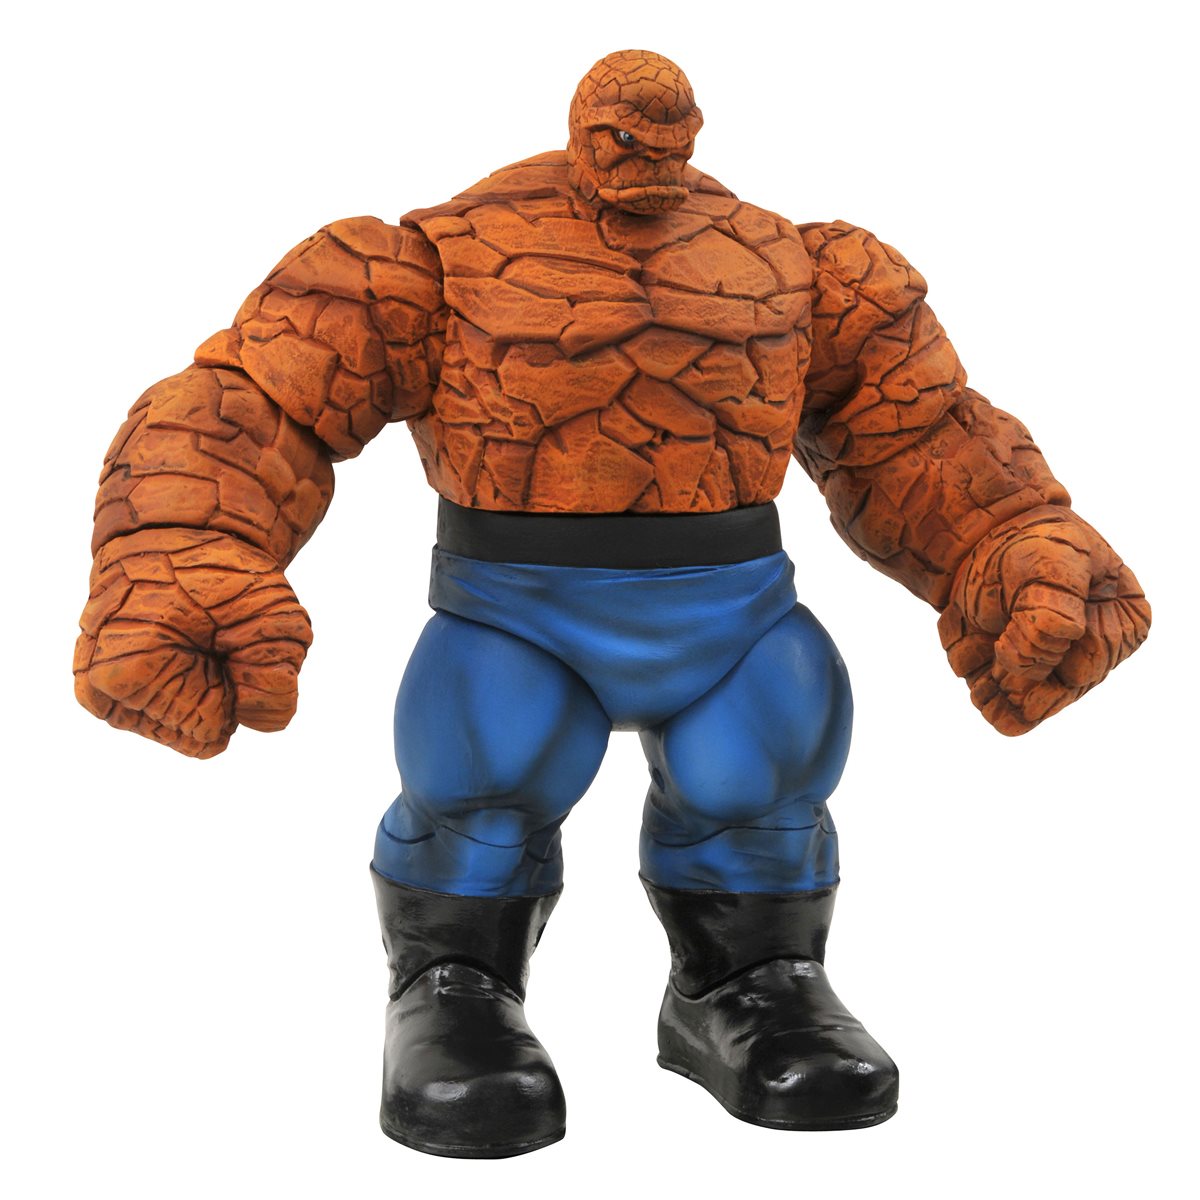 Diamond Marvel Select Fantastic Four The Thing Action Figure